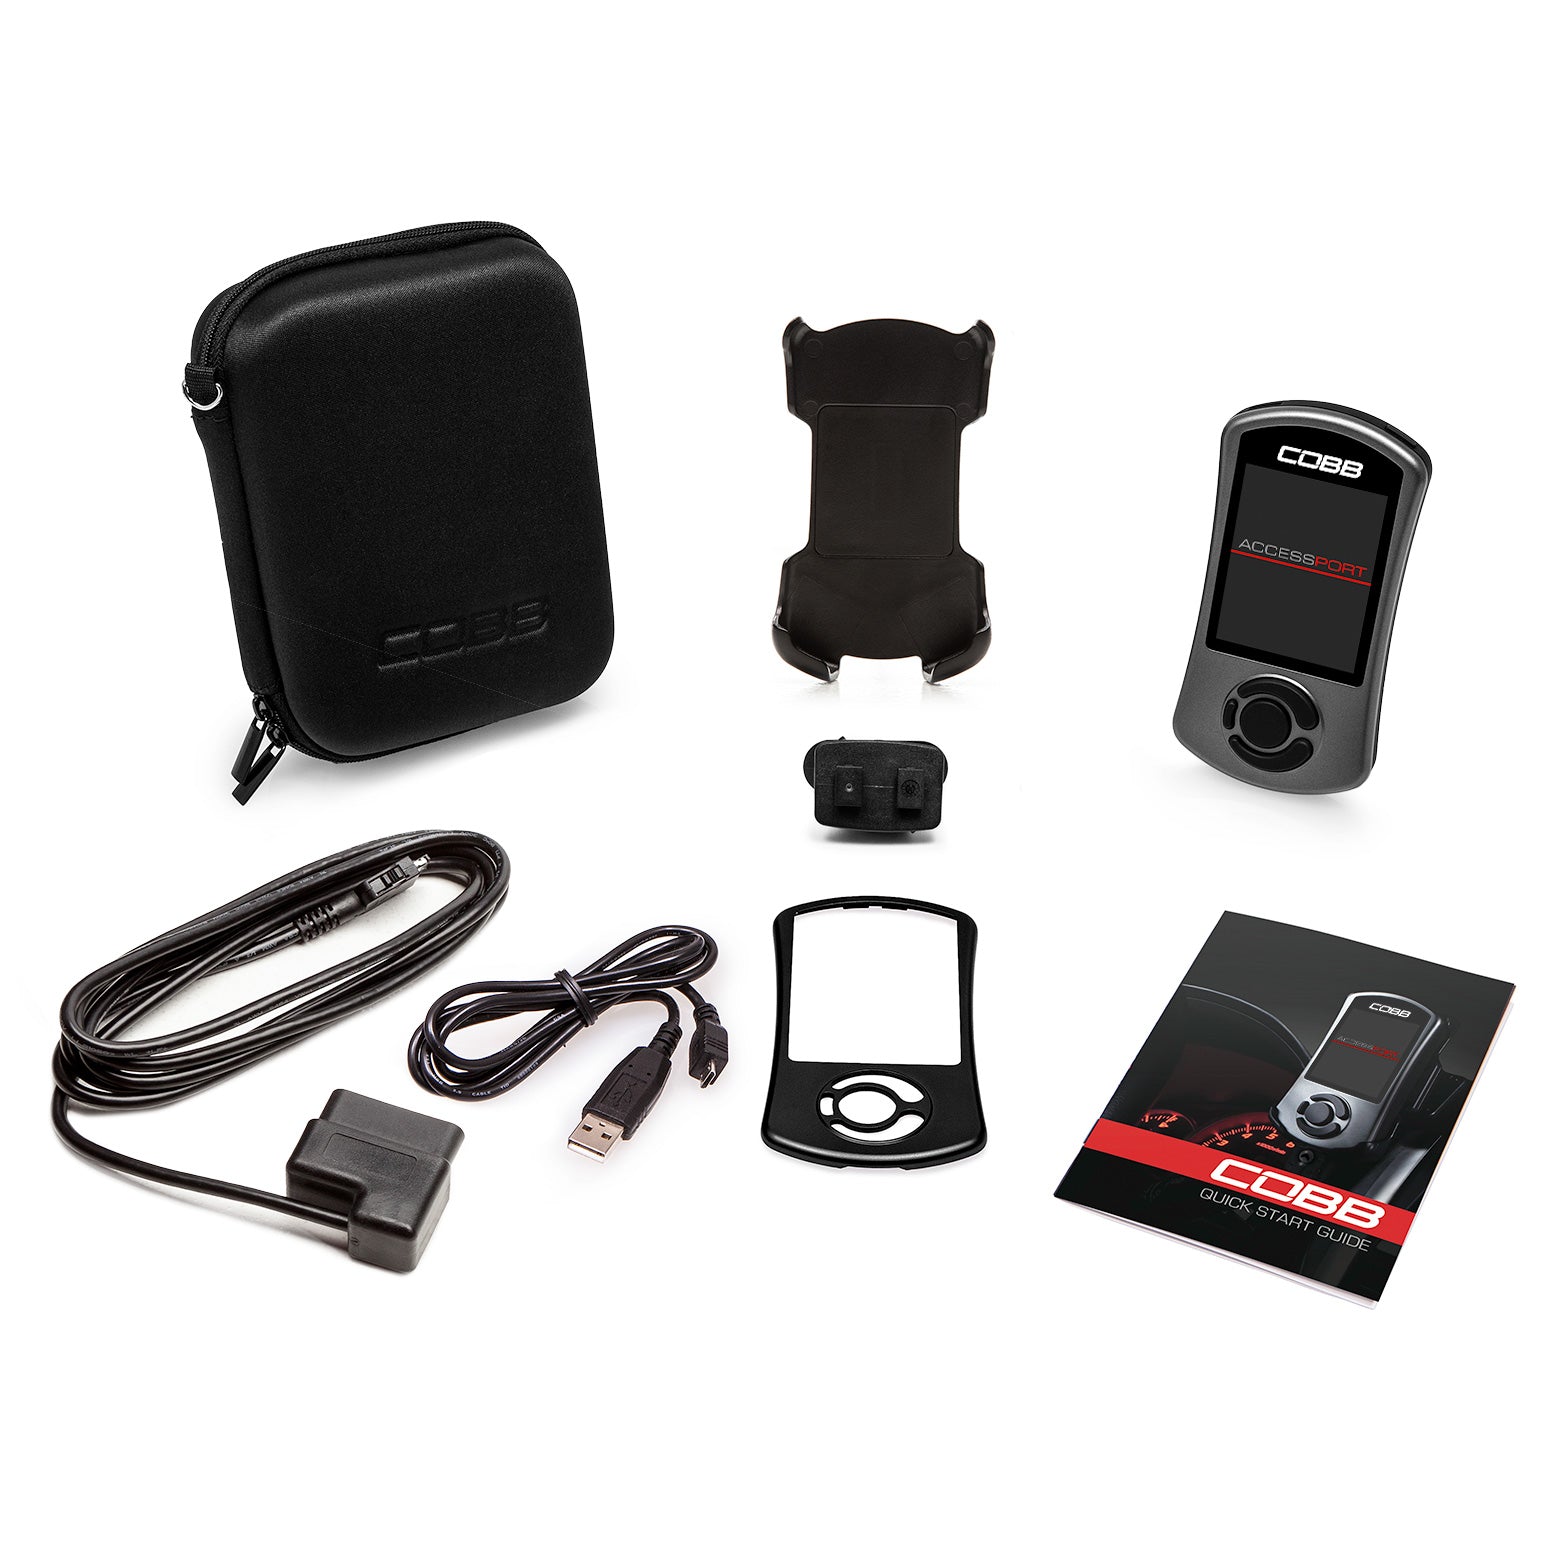 Accessport with PDK Flashing for Porsche 987.2 Cayman, Boxster / 997.2 Carrera - 0